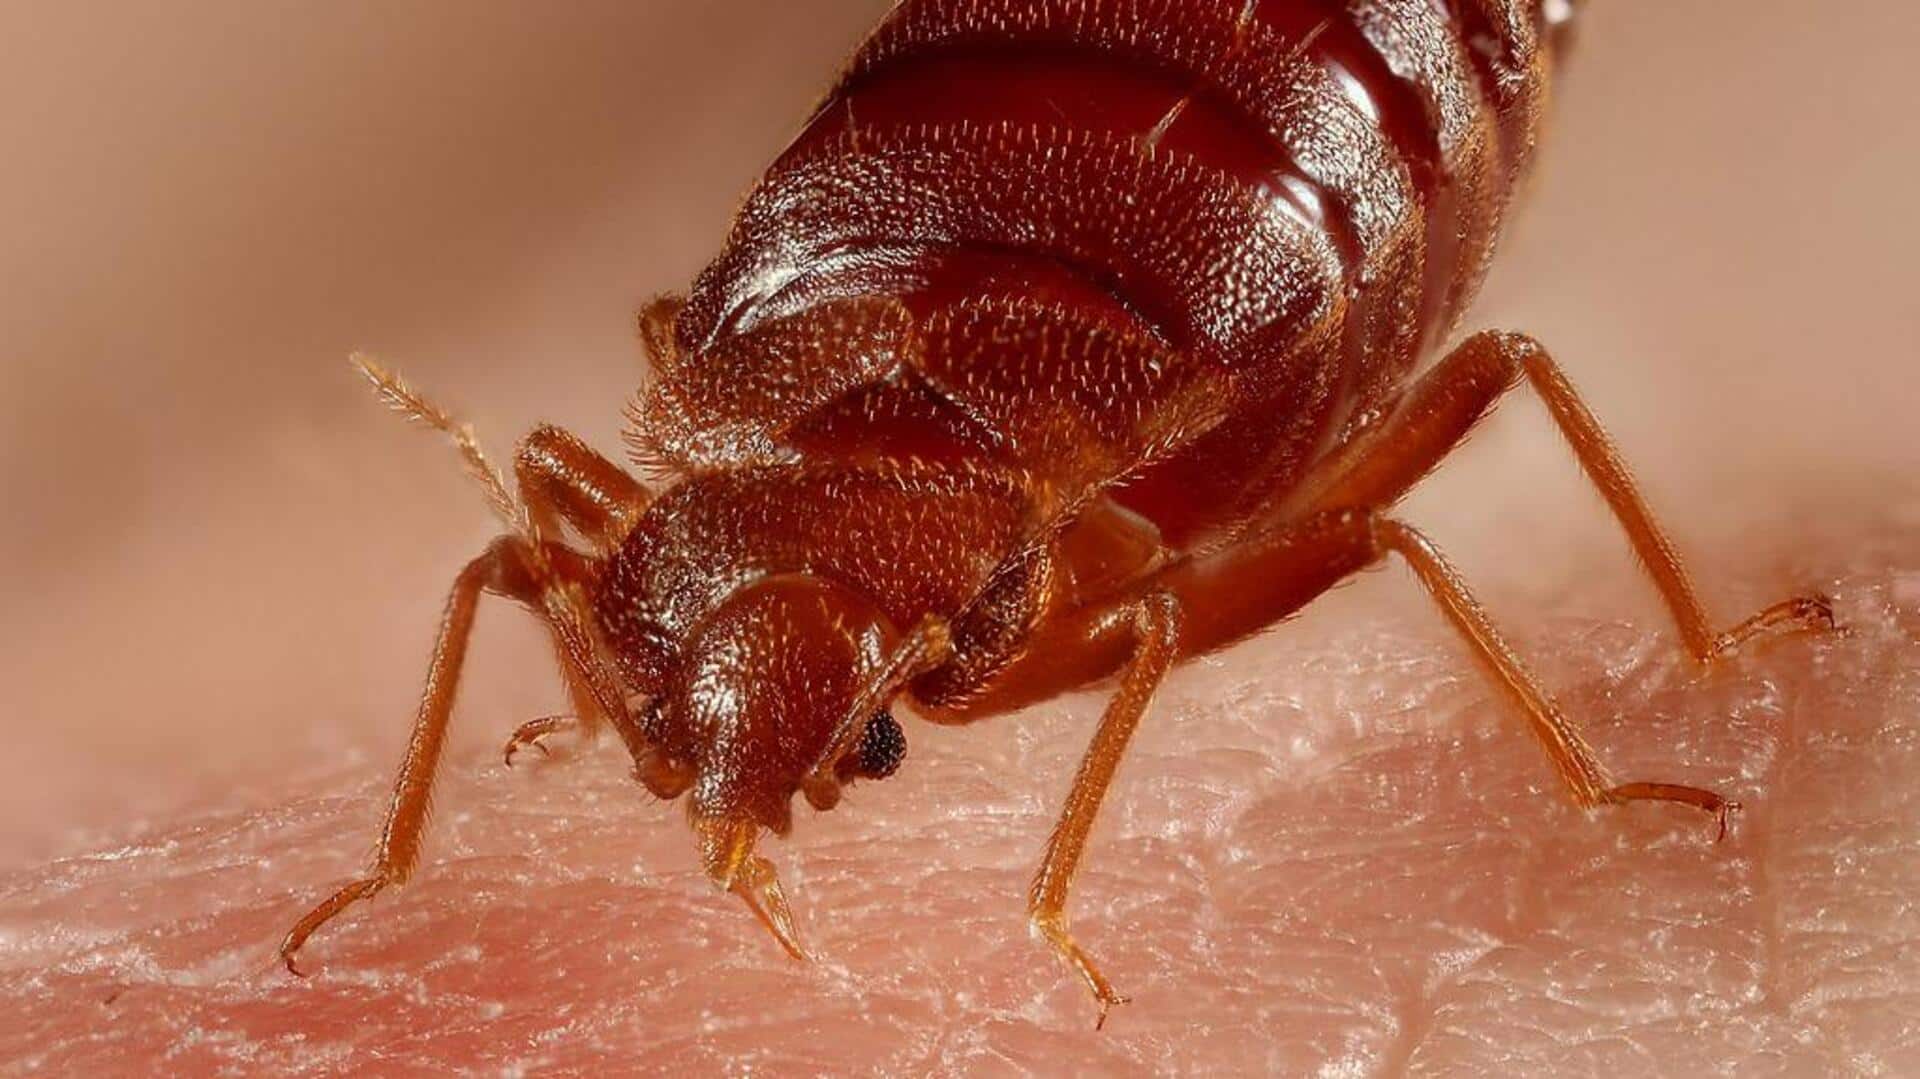 Bedbug alarm: What's behind the infestation and how to cope